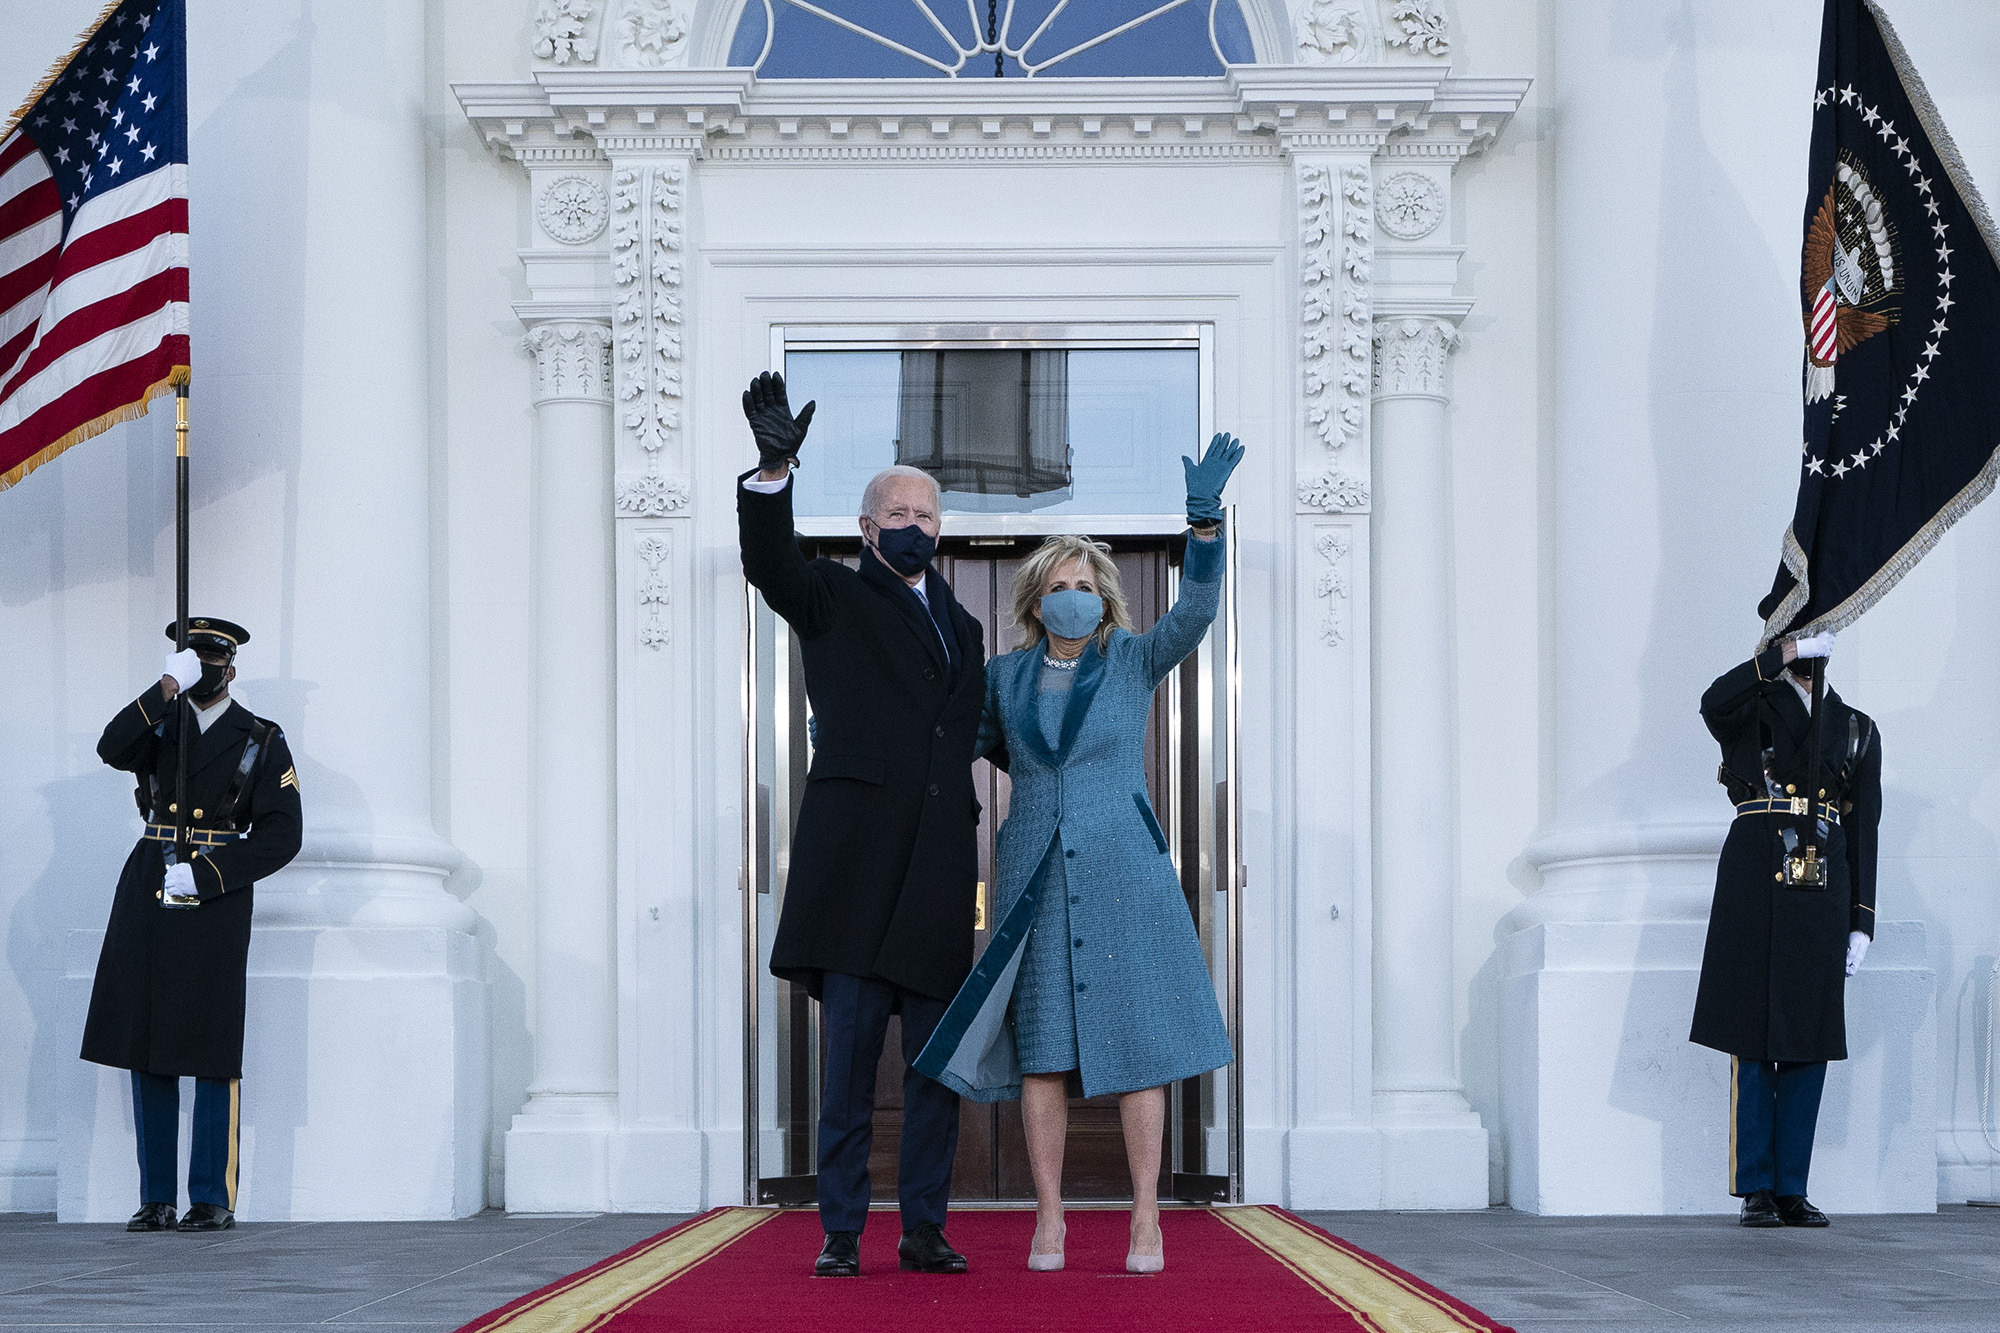 President Joe Biden and first lady Jill Biden wave as they arrive at the North Portico of the White House, Wednesday, Jan. 20, 2021, in Washington. (Alex Brandon/Pool via AP)